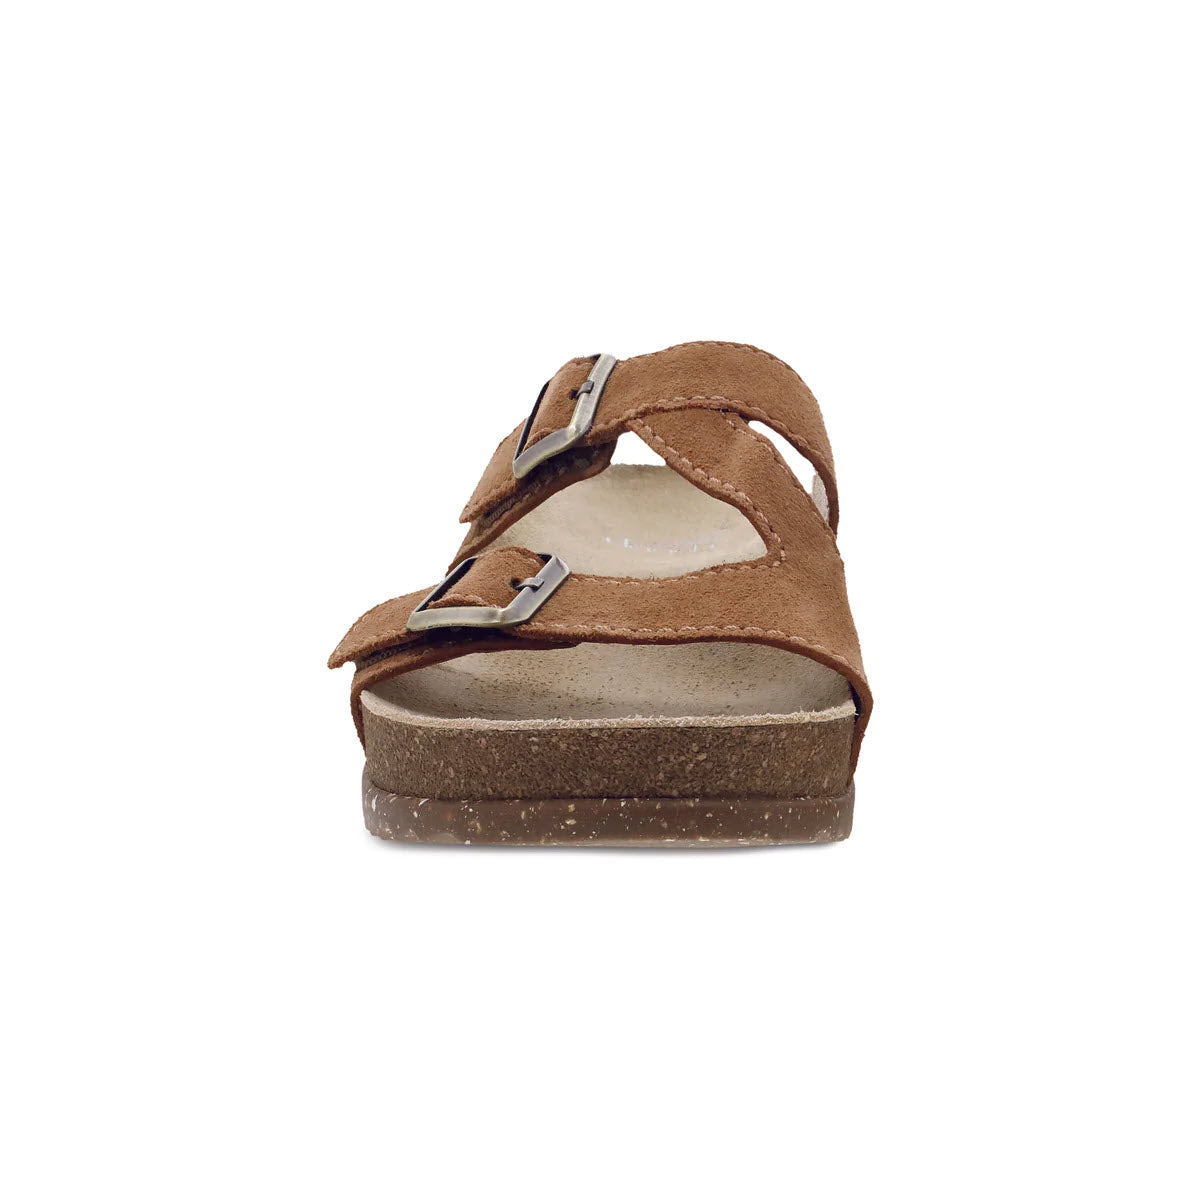 A single brown suede Dansko Dayna sandal with two straps and buckle closures, displayed against a white background.